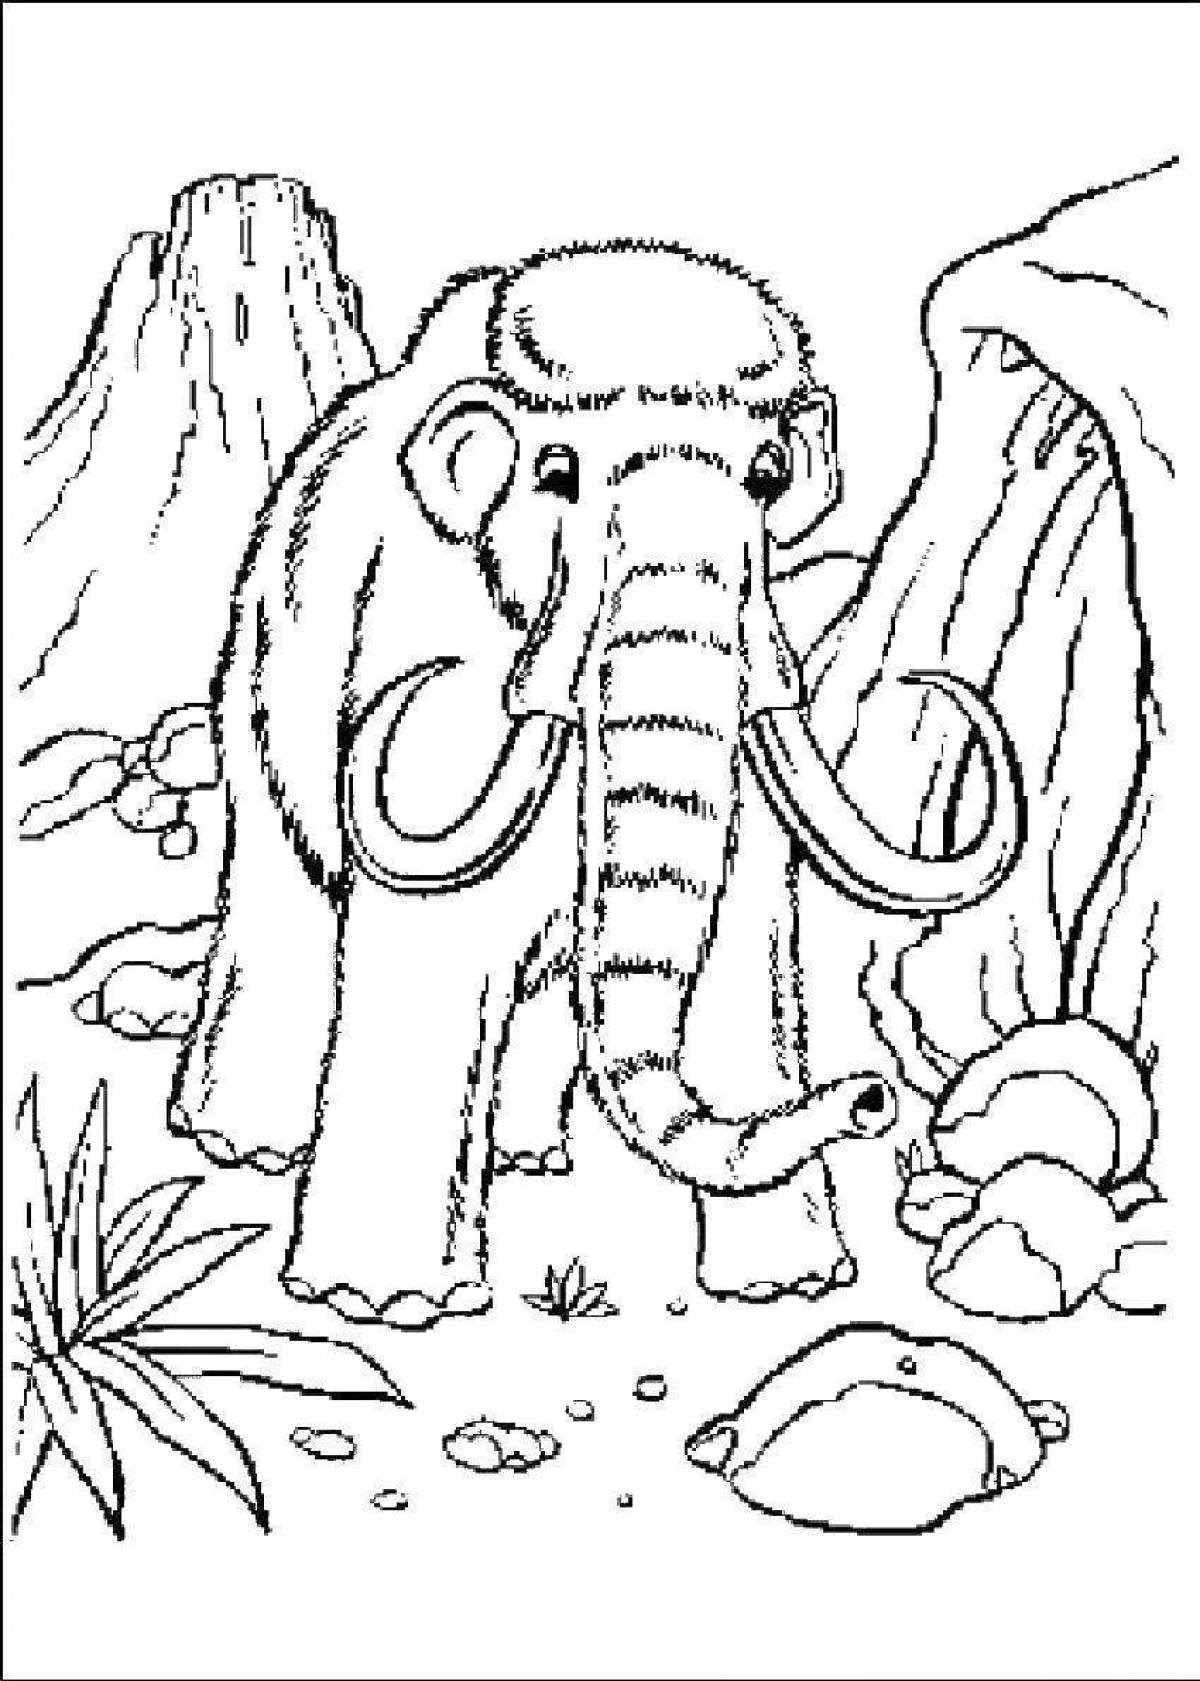 Colorful mammoth coloring book for kids